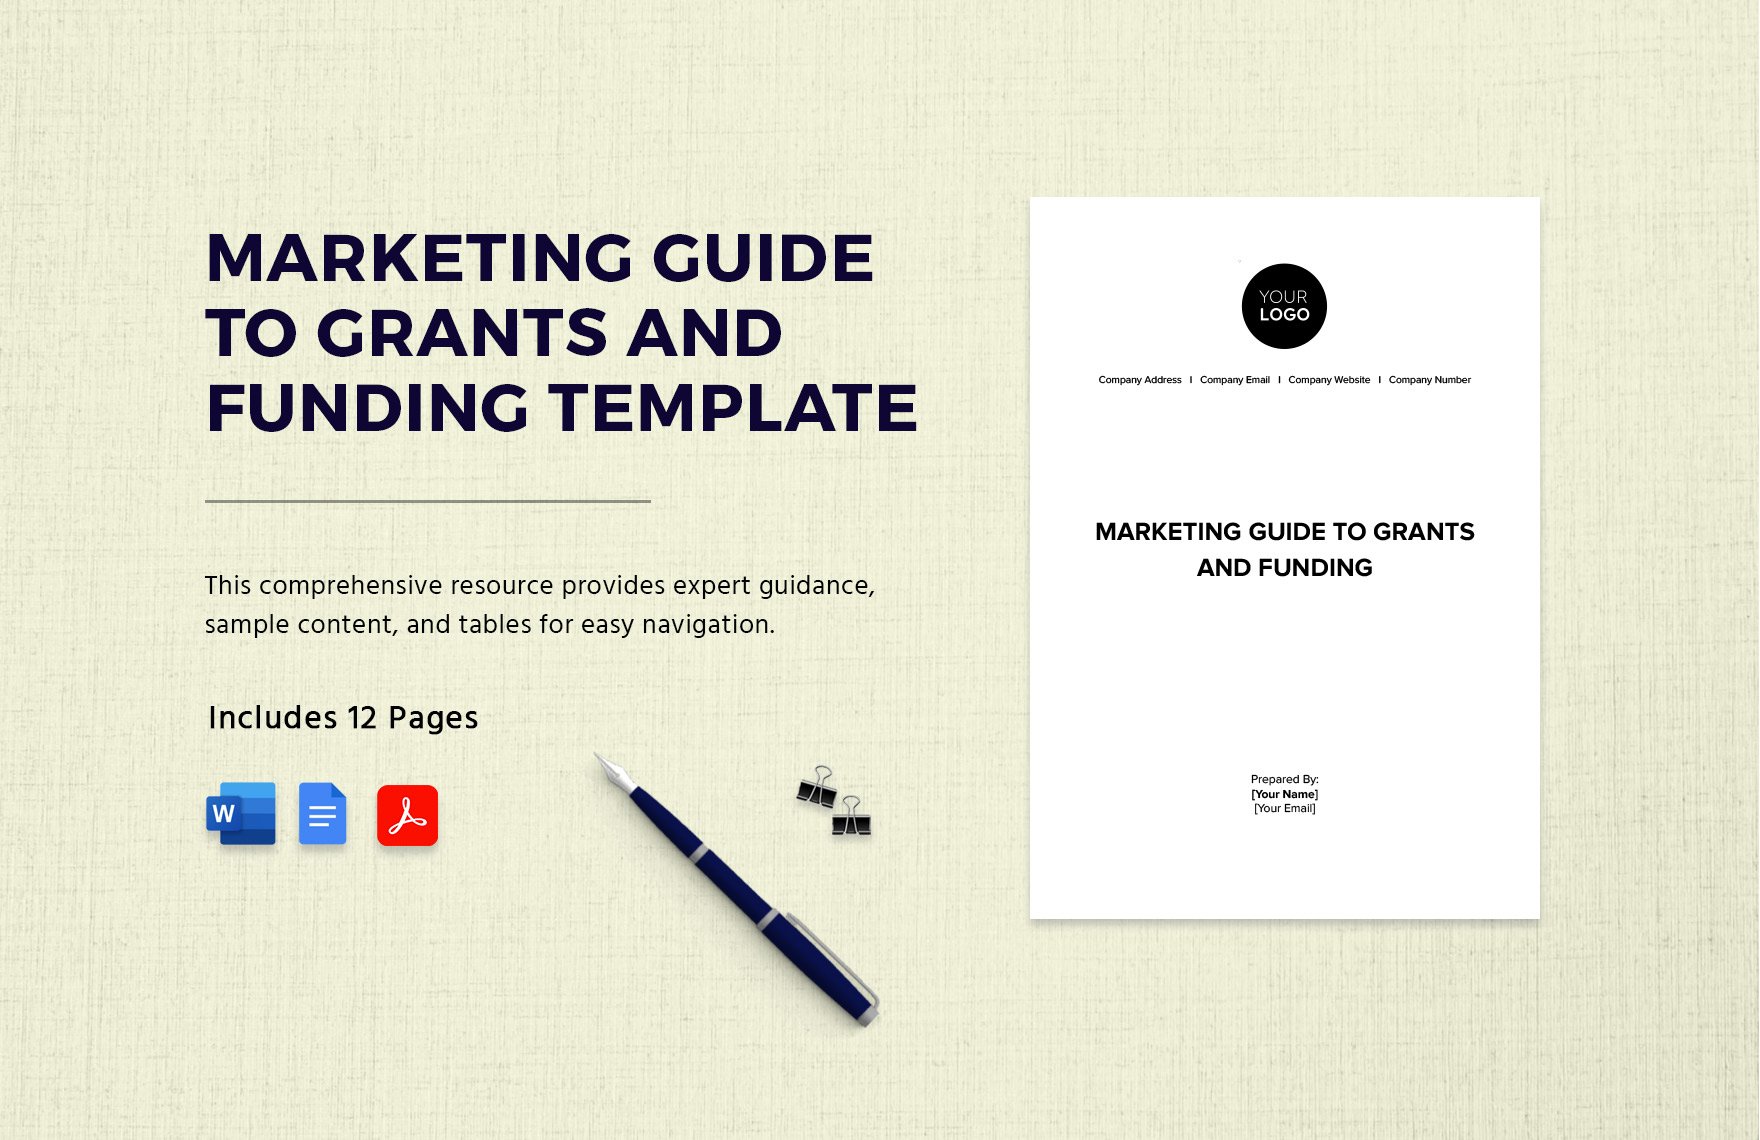  Marketing Guide to Grants and Funding Template